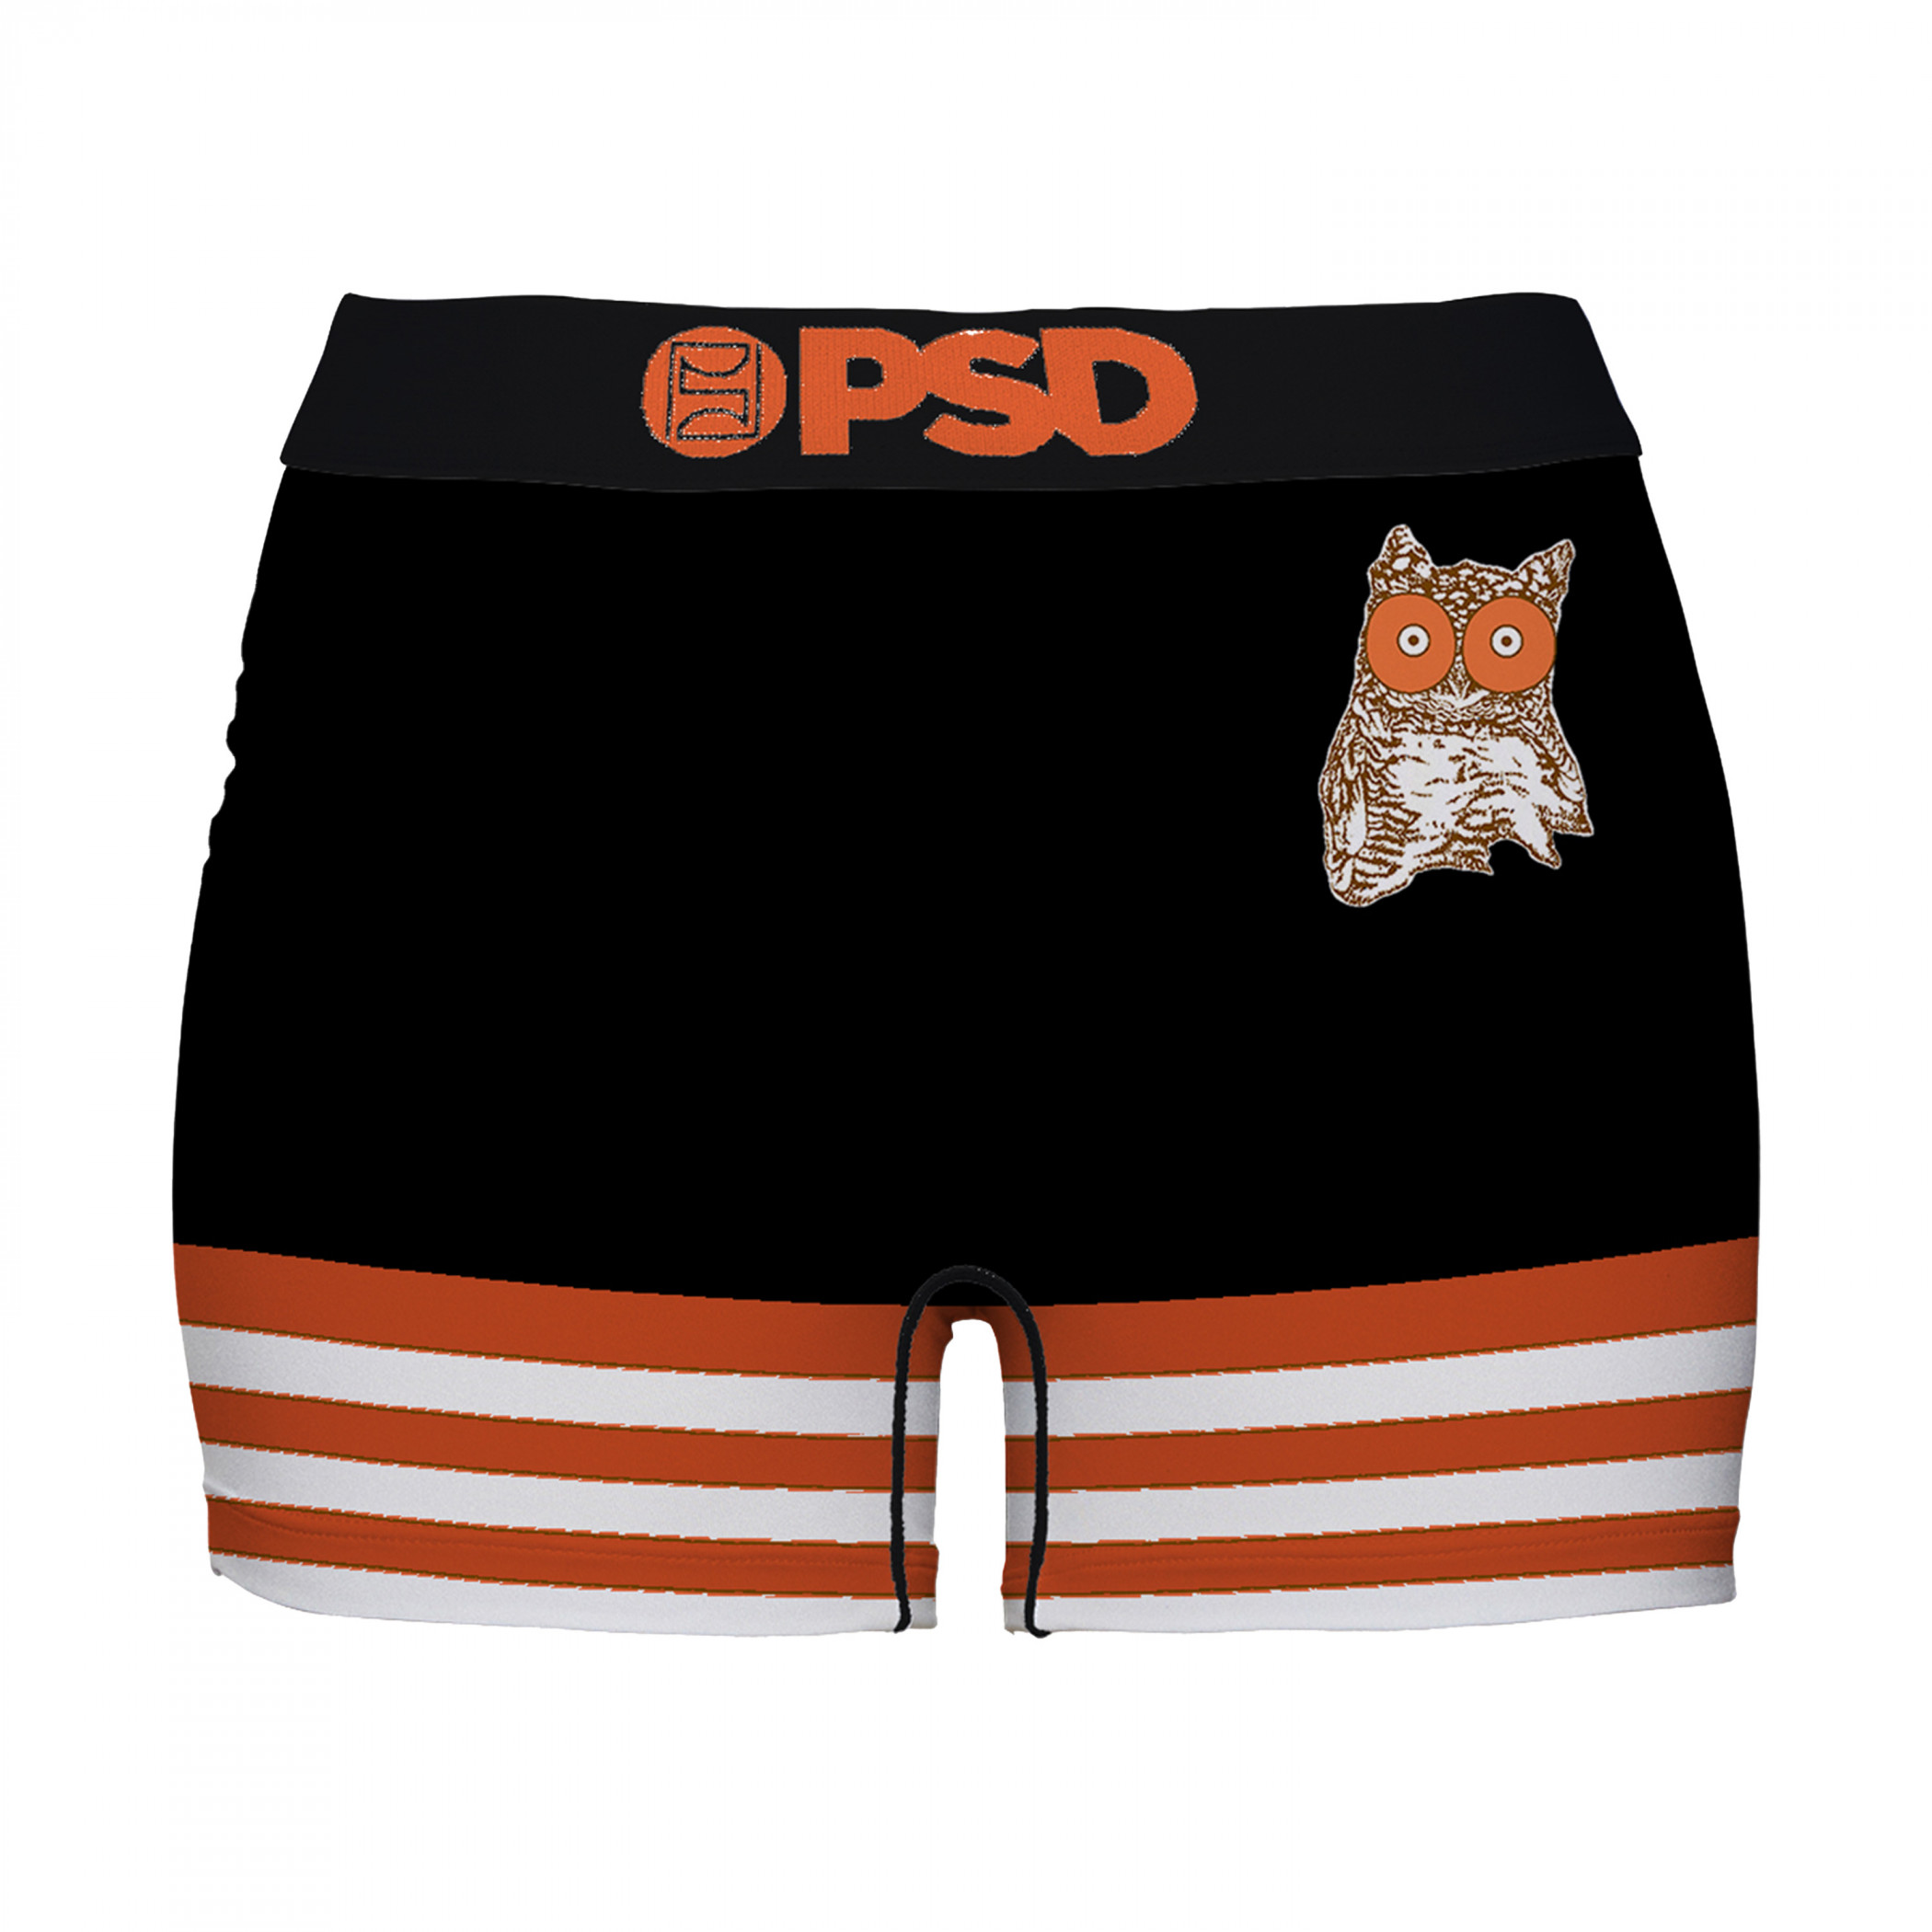 PSD Hooters Game Day Boy Shorts